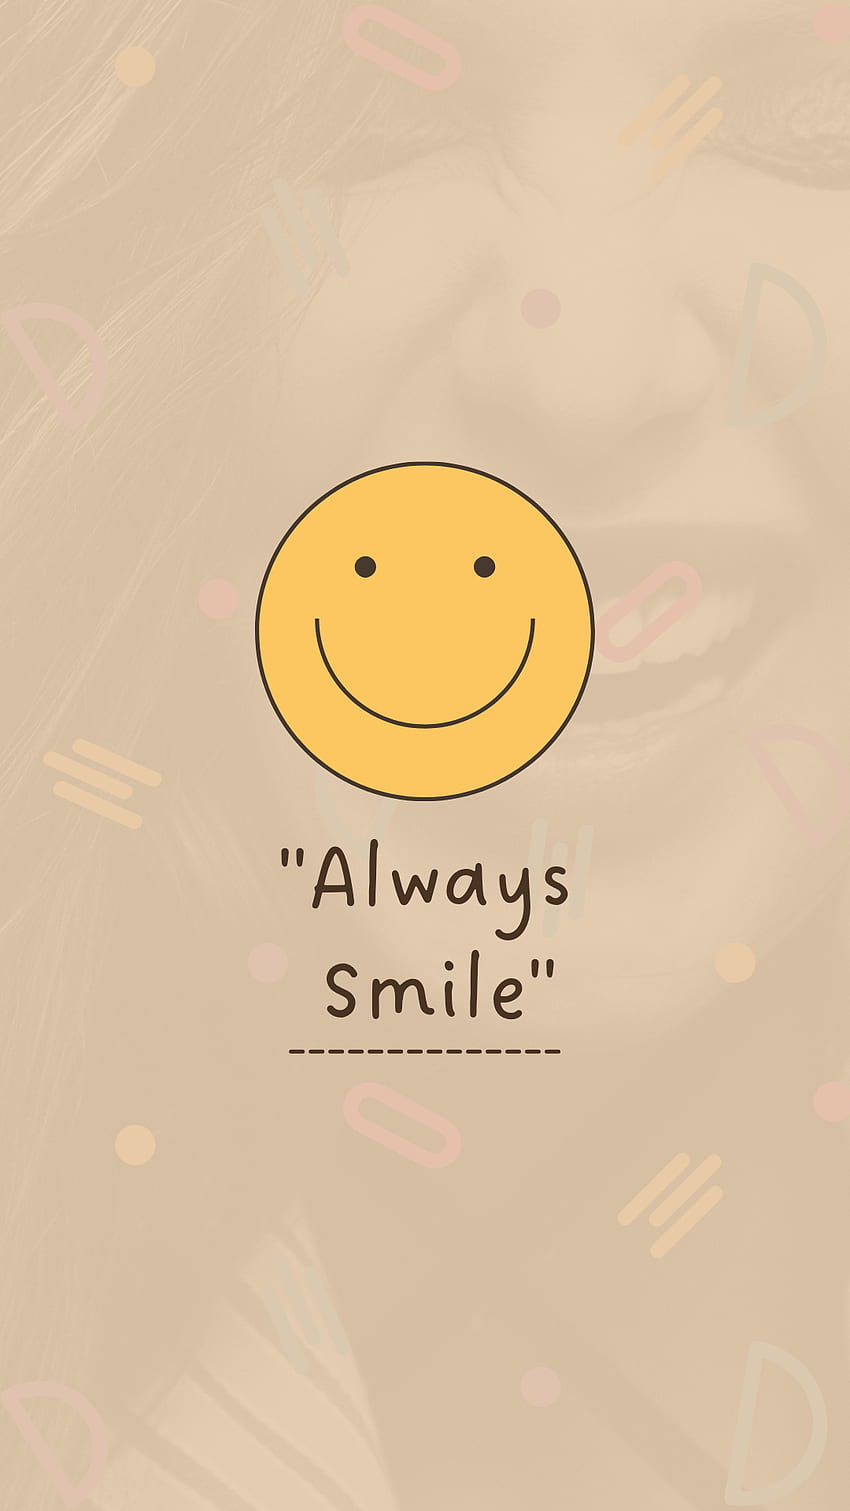 Smily Smile wall poster wallpaper 12 X 18 Inches Paper Print  Quotes   Motivation posters in India  Buy art film design movie music nature  and educational paintingswallpapers at Flipkartcom